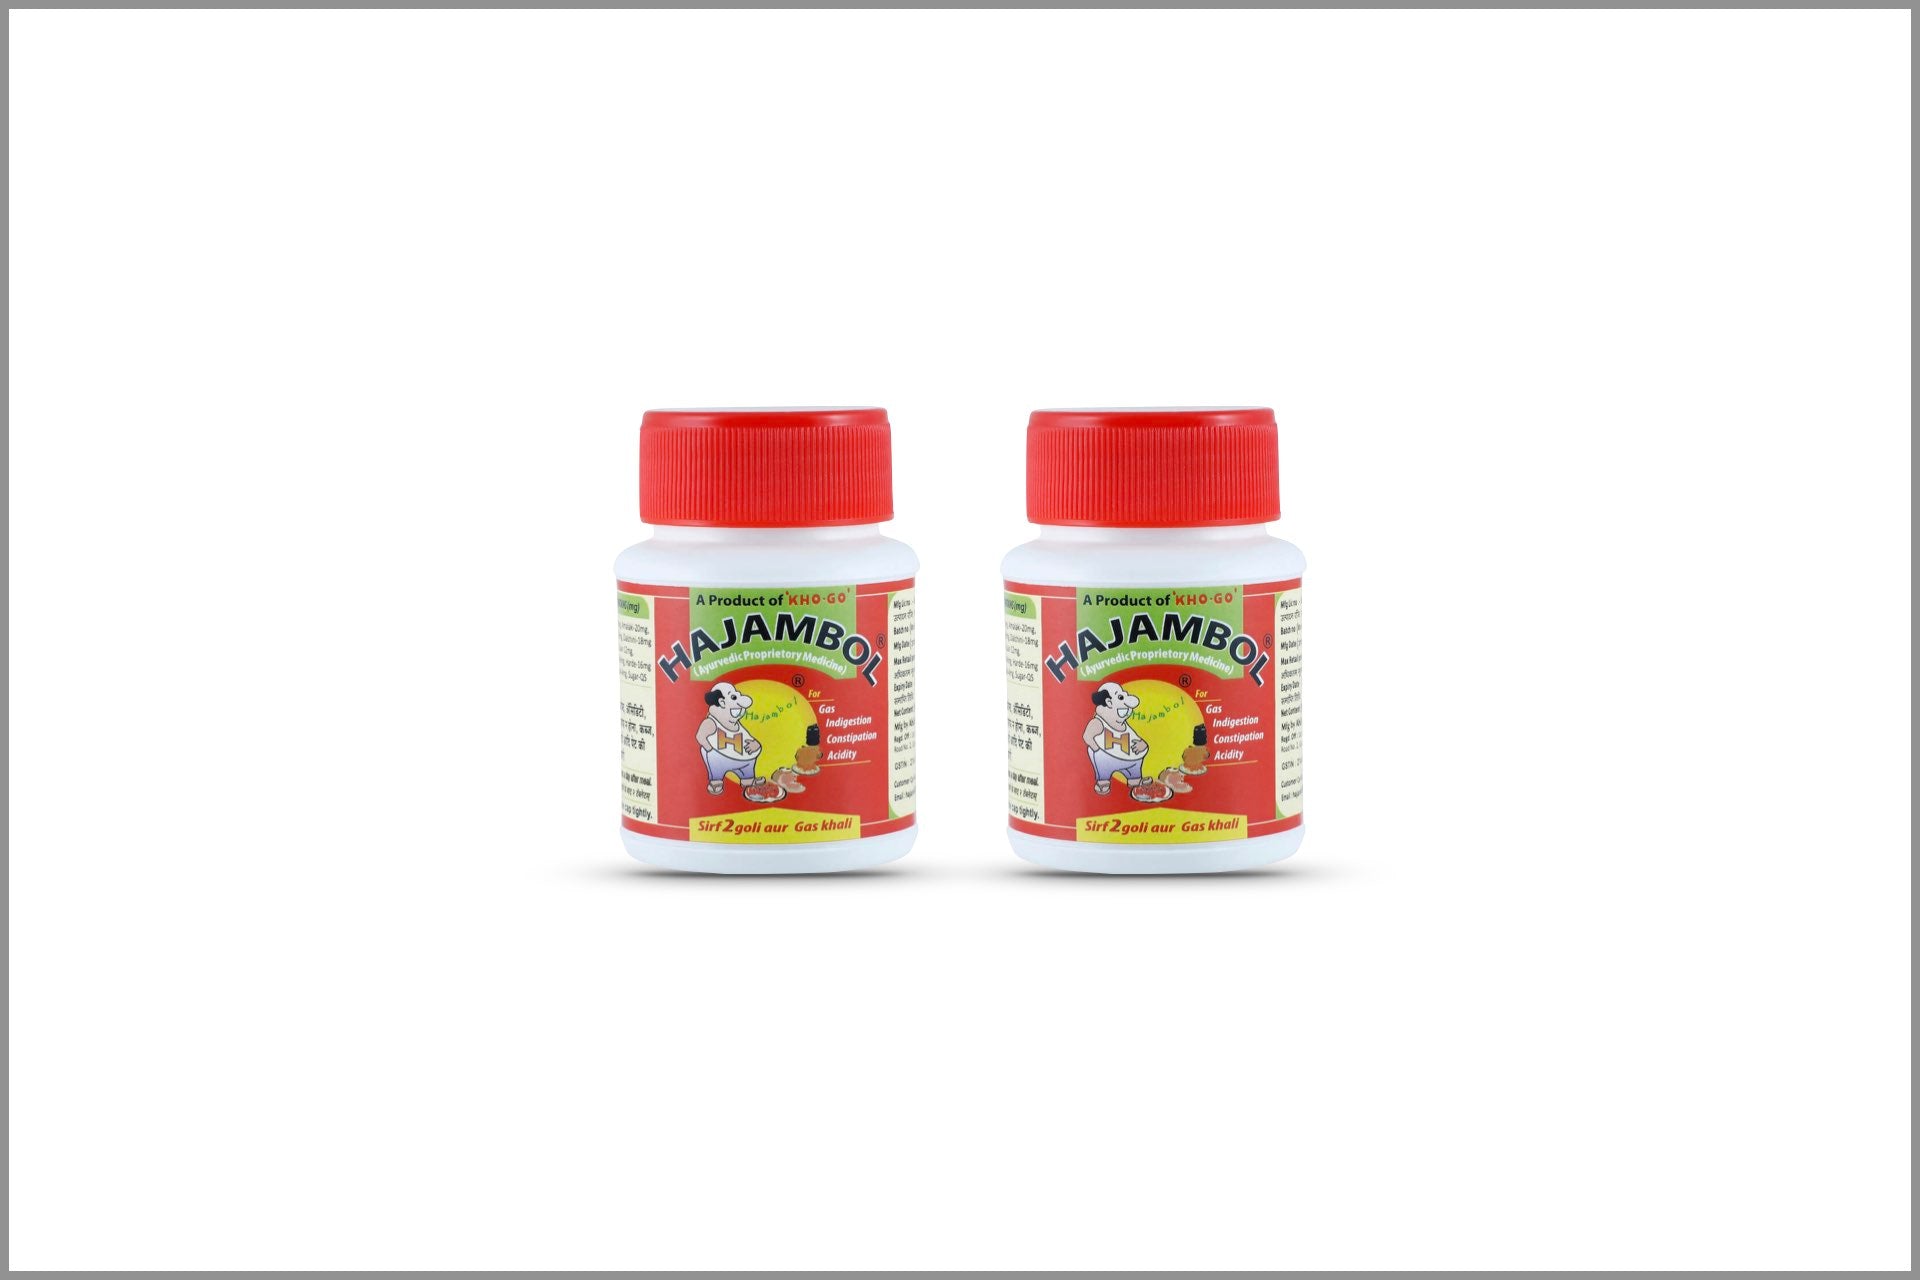 Hajambol Gas Tablets - Pack of 2 x 50 tablets